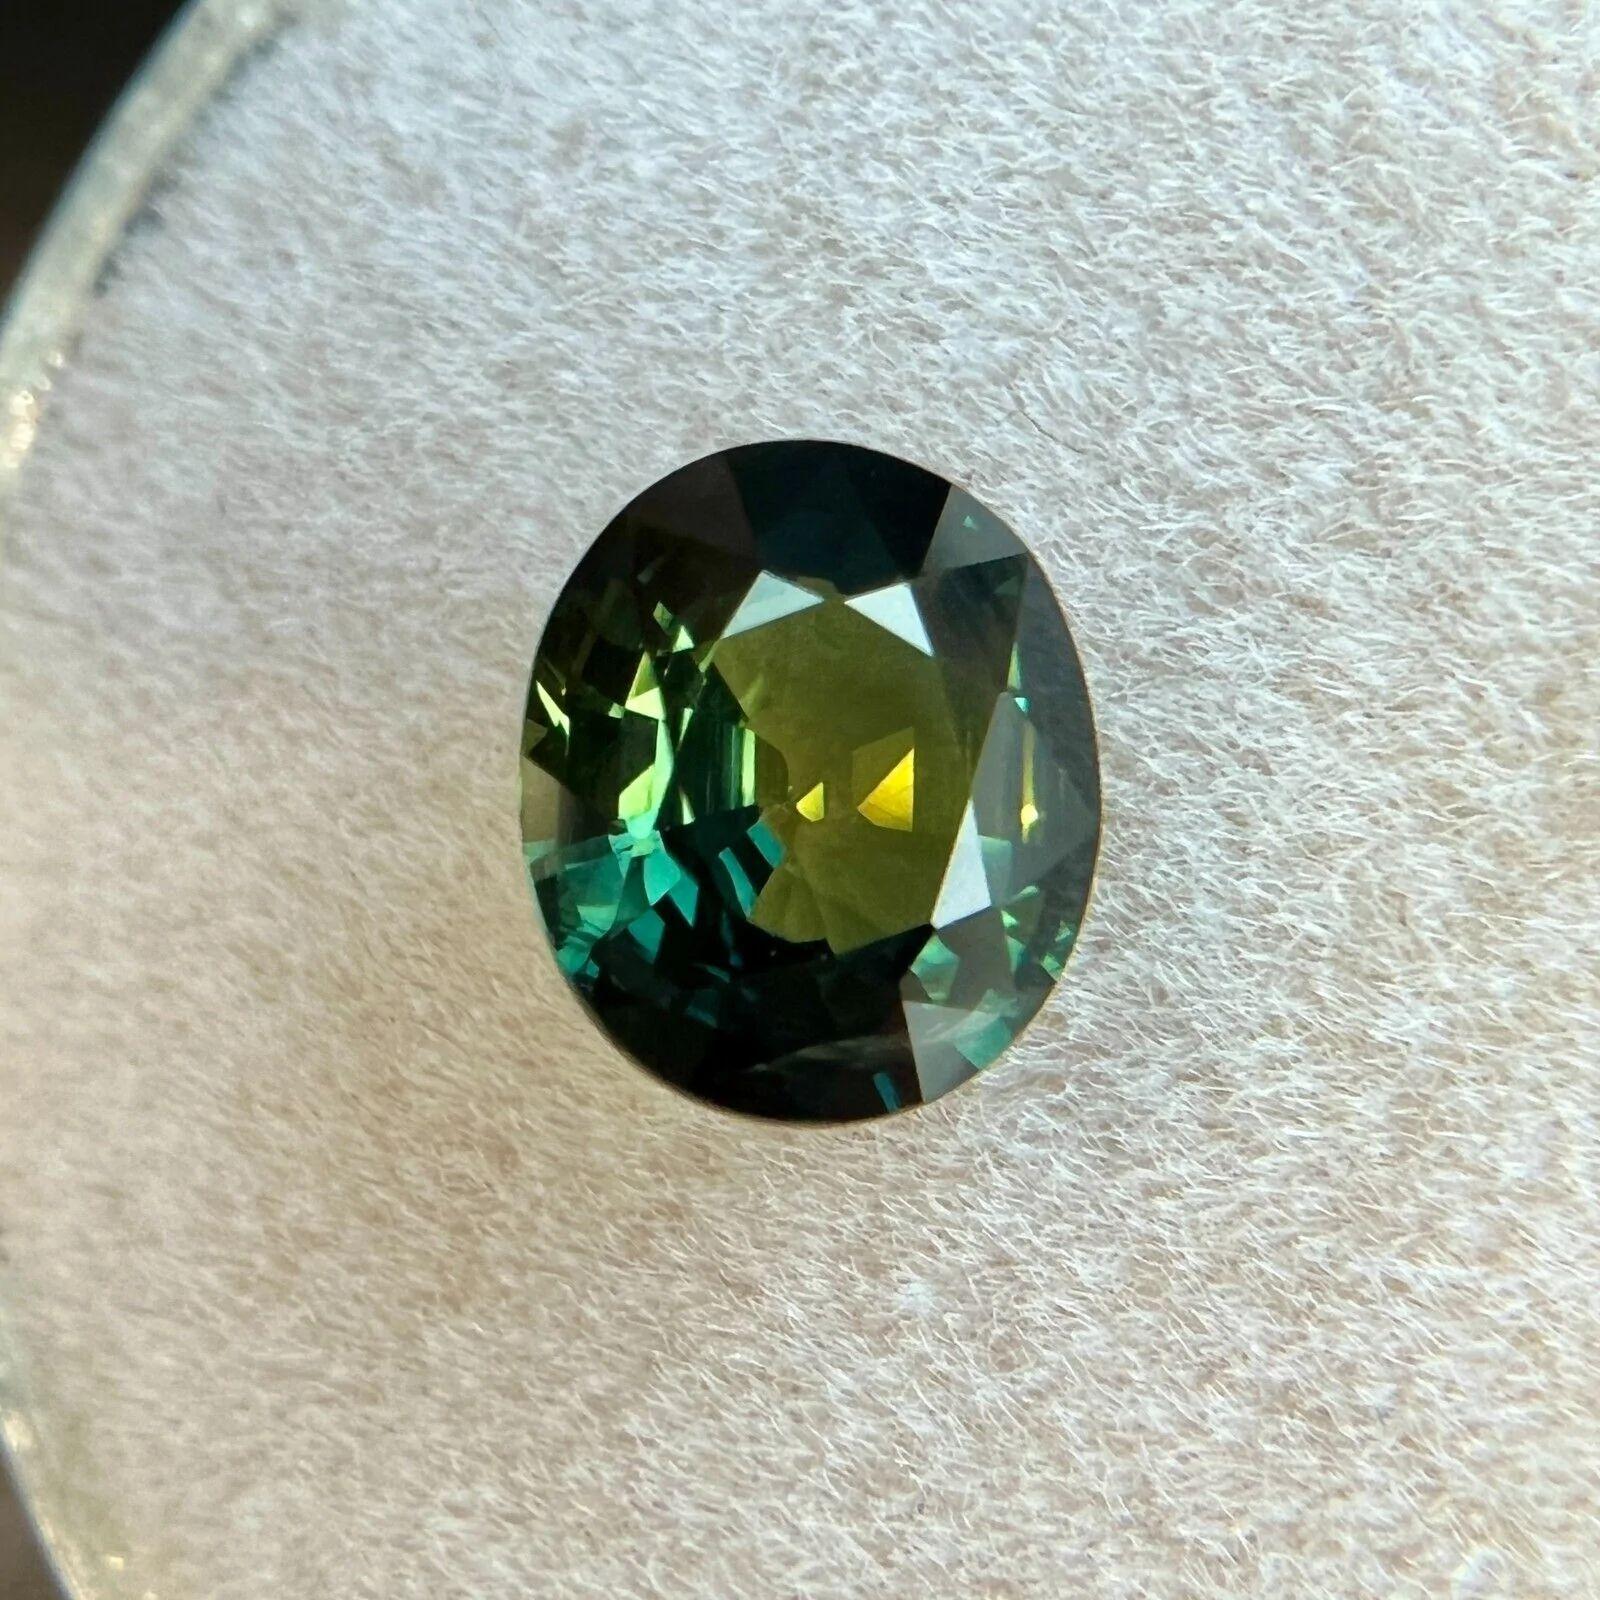 1.44ct Australian Vivid Blue Green Sapphire Oval Cut Loose Gem 7.3x6.2mm VS

Natural Australian Green Blue Sapphire Gem.
1.44 Carat with a beautiful and unique green blue colour. Very rare and stunning to see. Also has very good clarity, a very